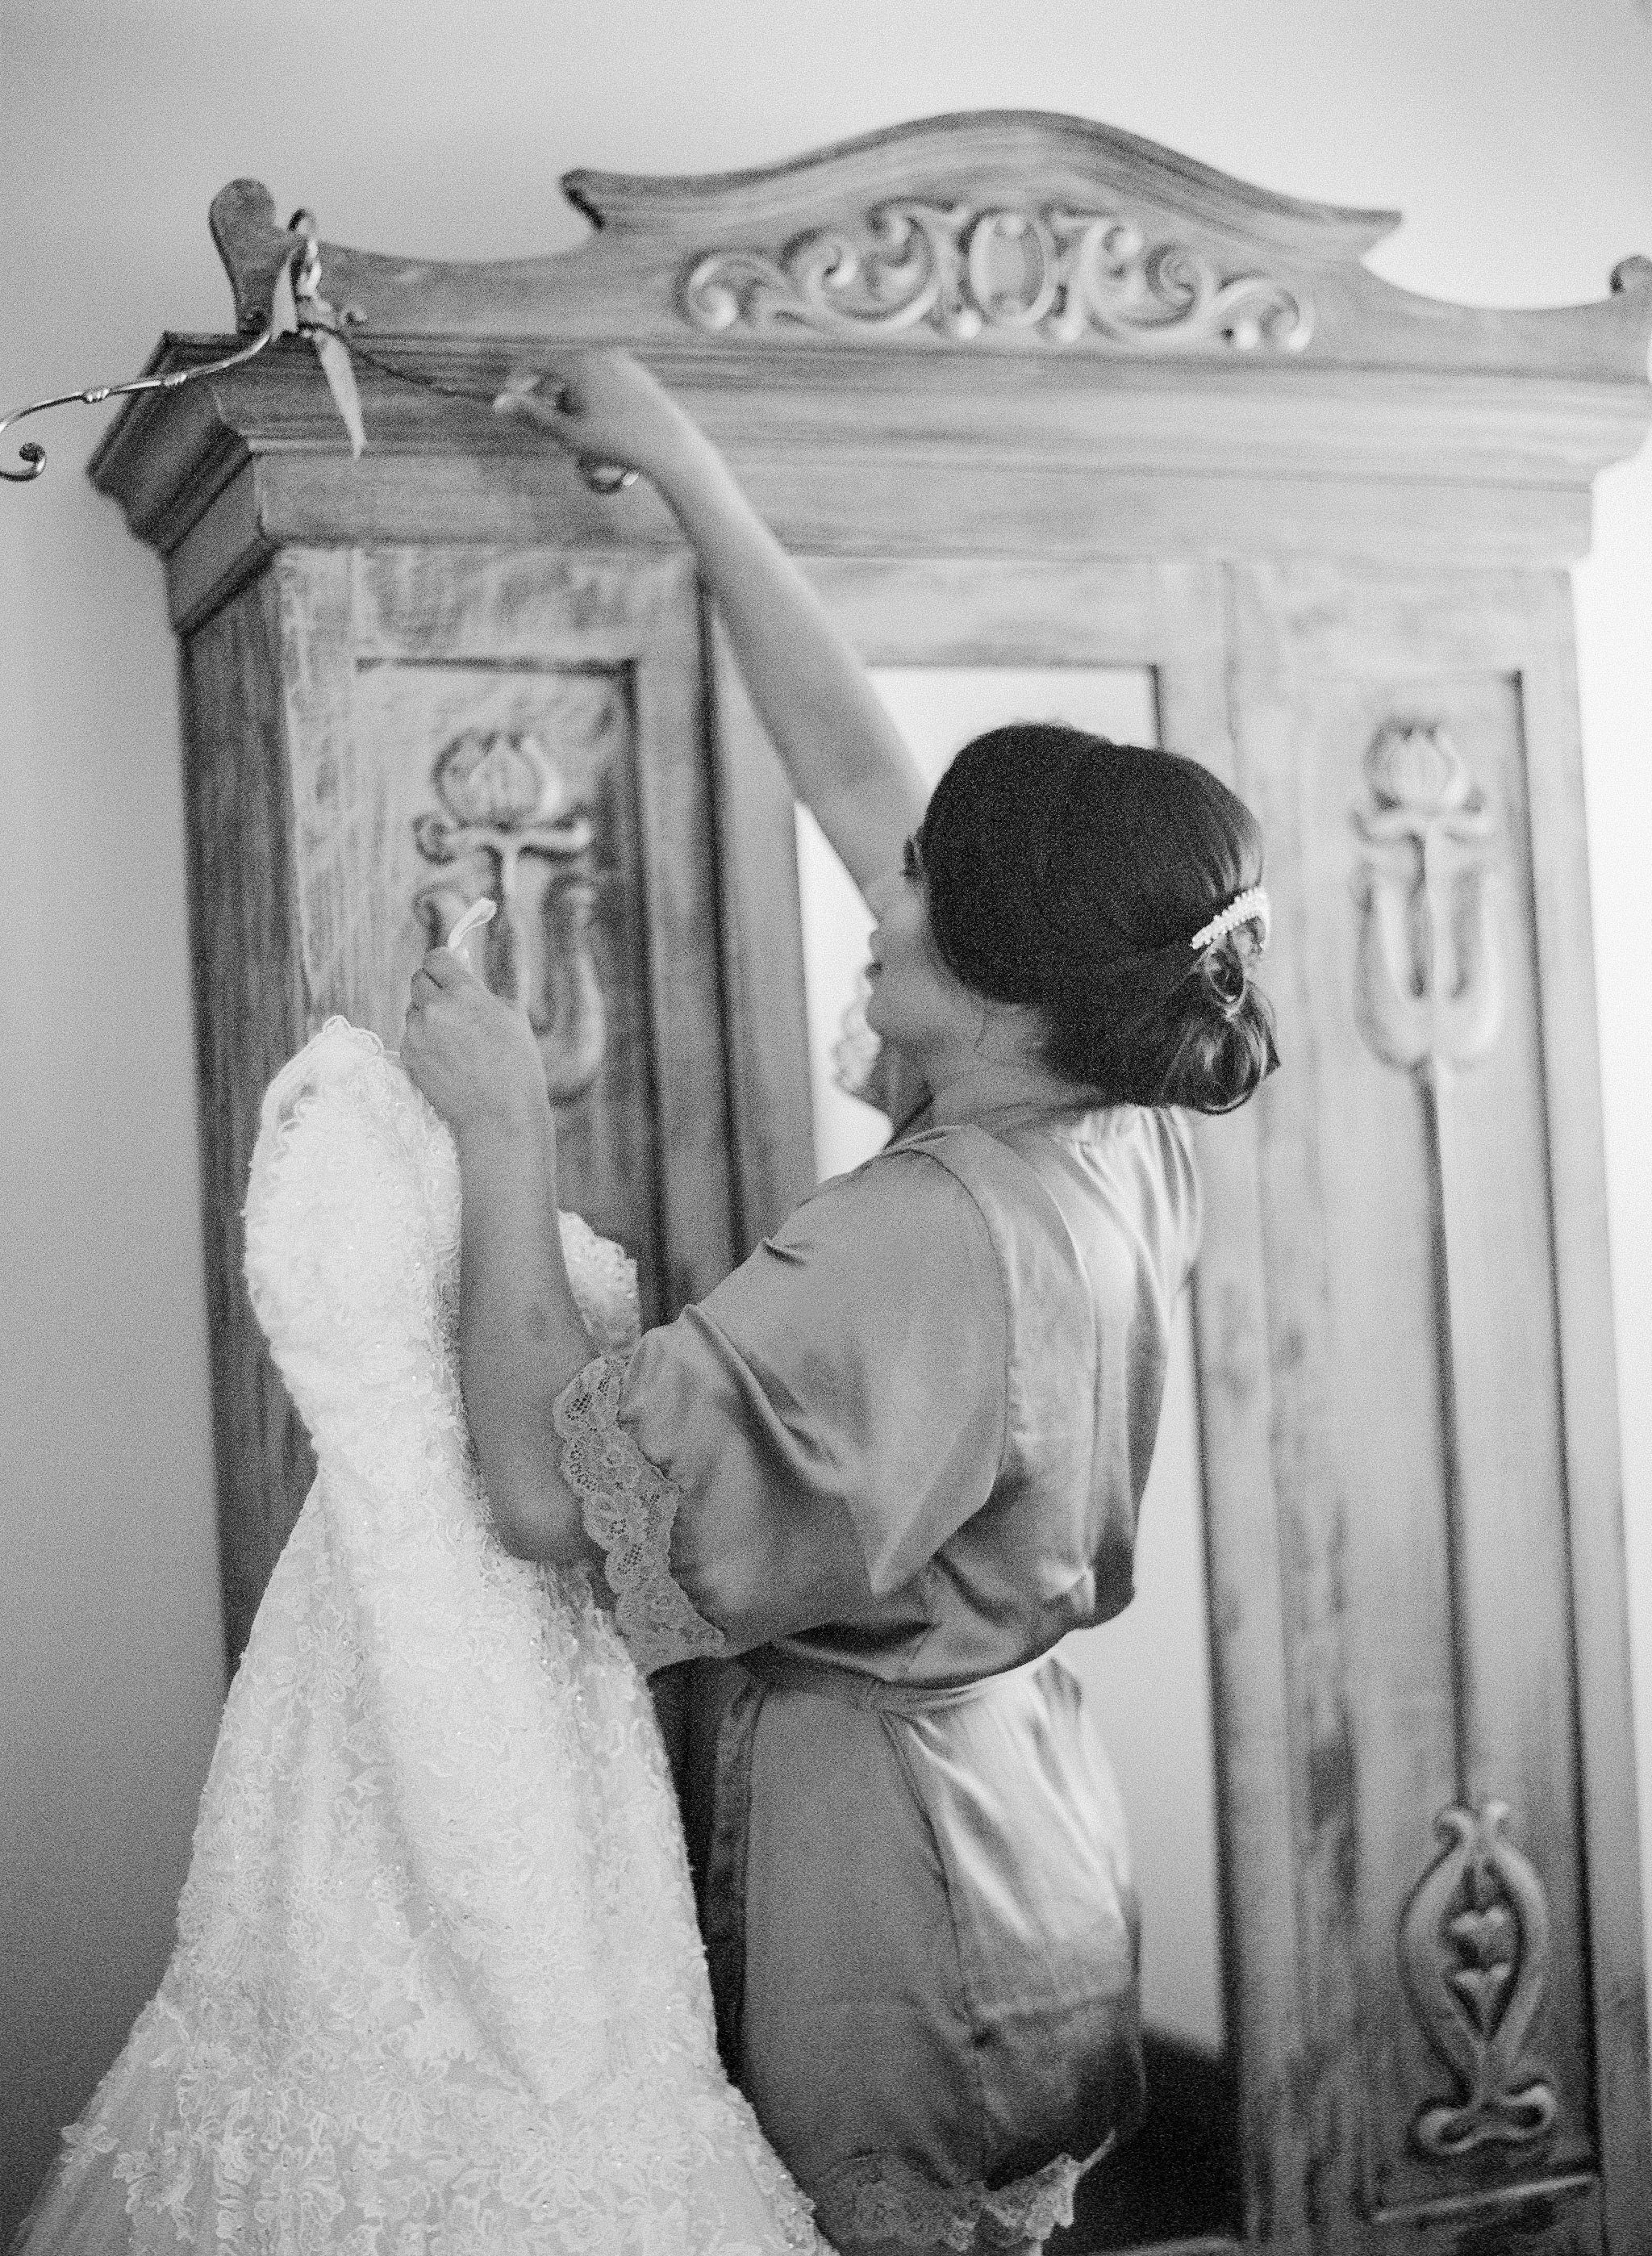 A bride dressed in a satin robe takes her wedding dress of the hook in Carneros, Inn Sonoma CA